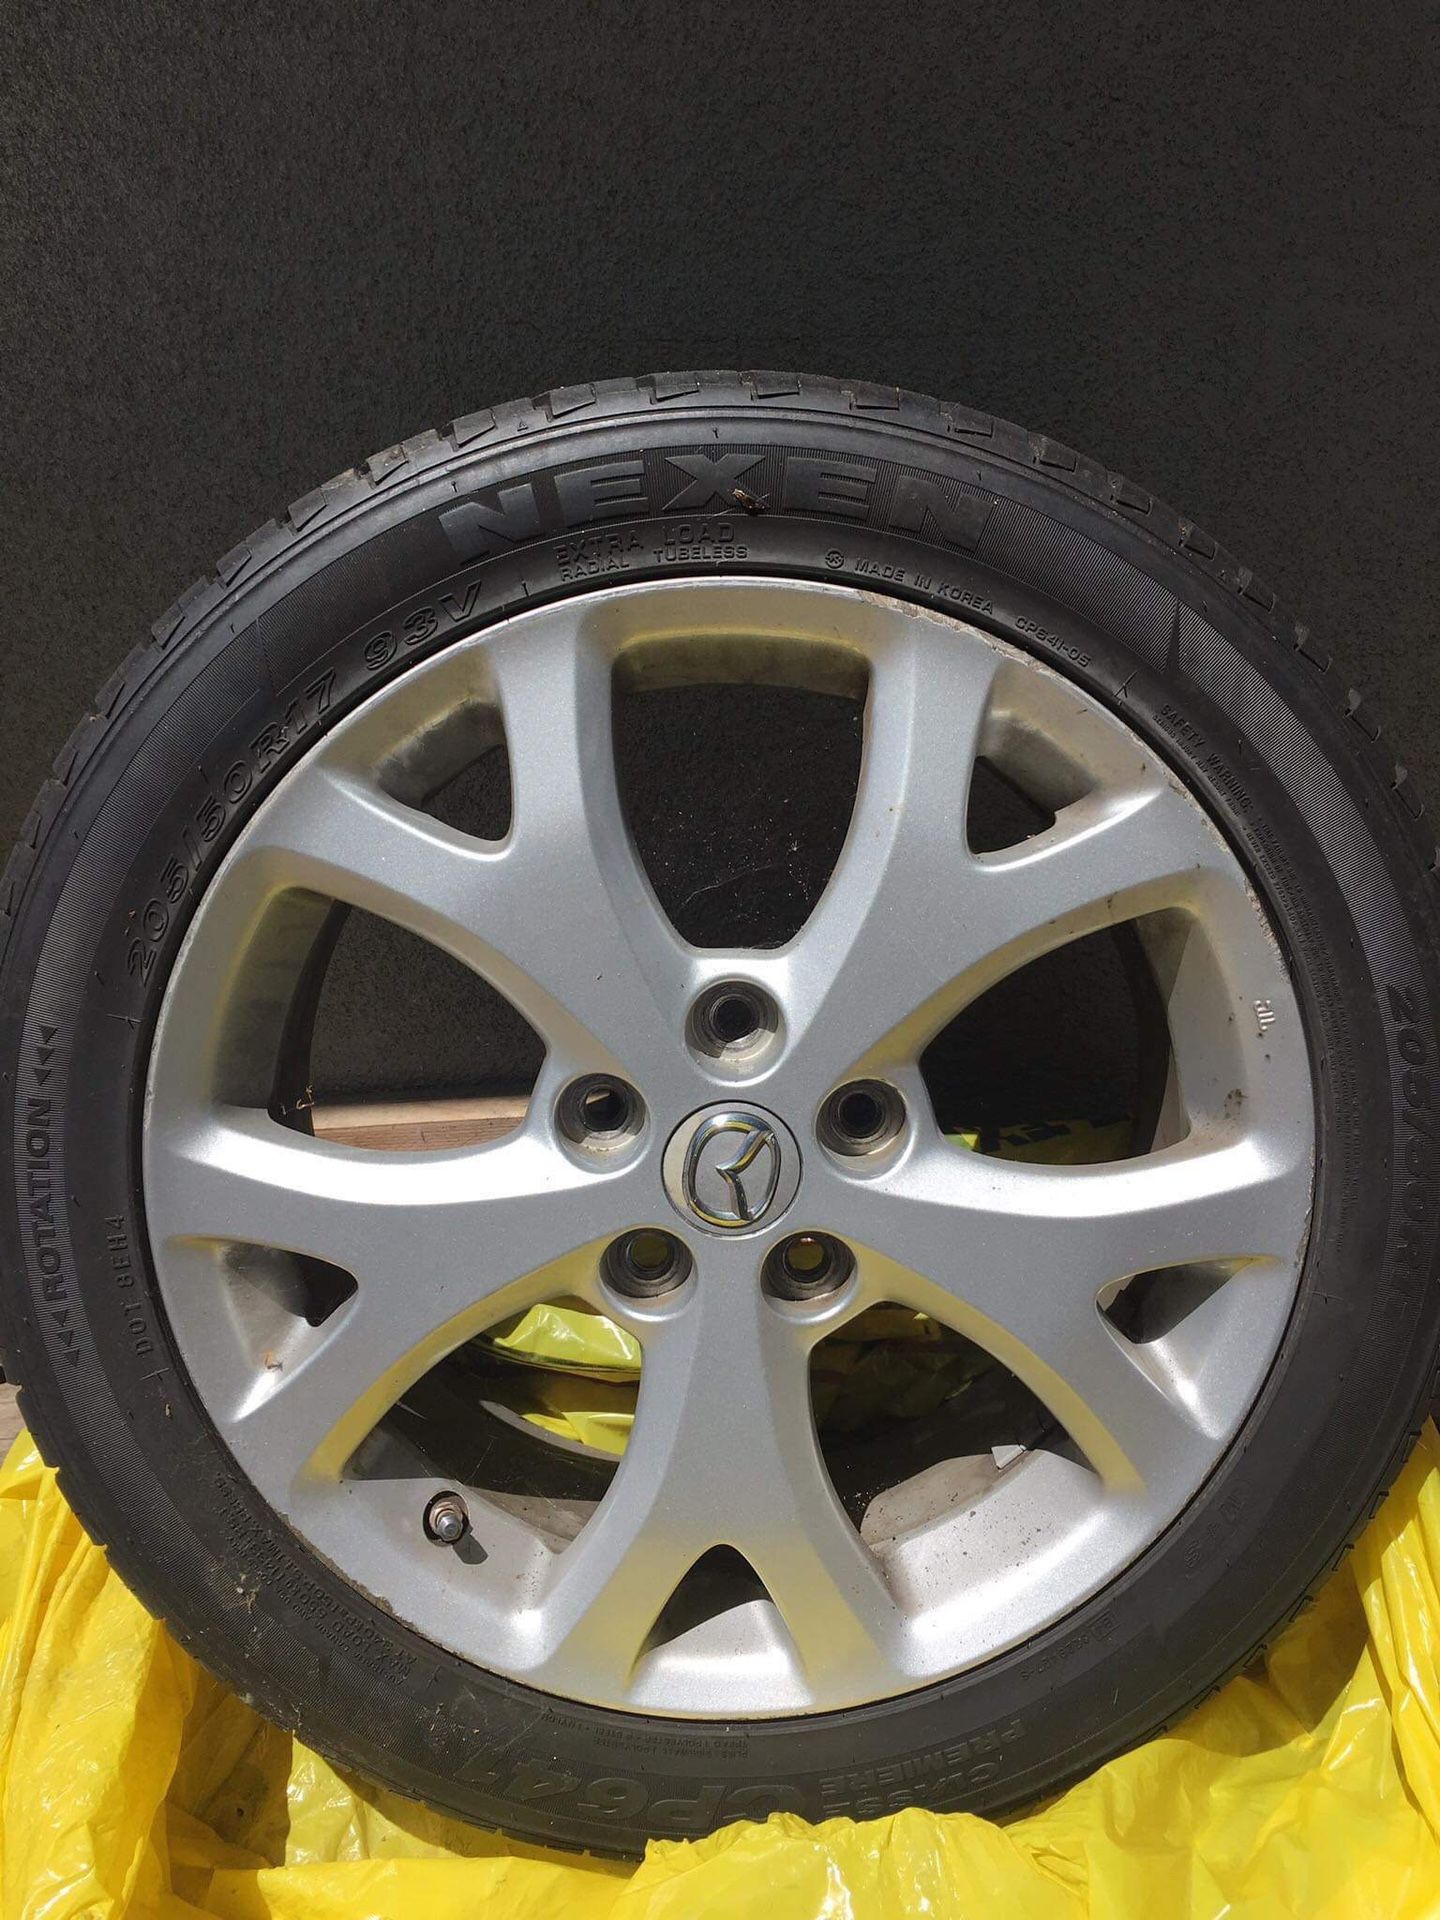 Tires for sale for Mazda 3. Set of 4